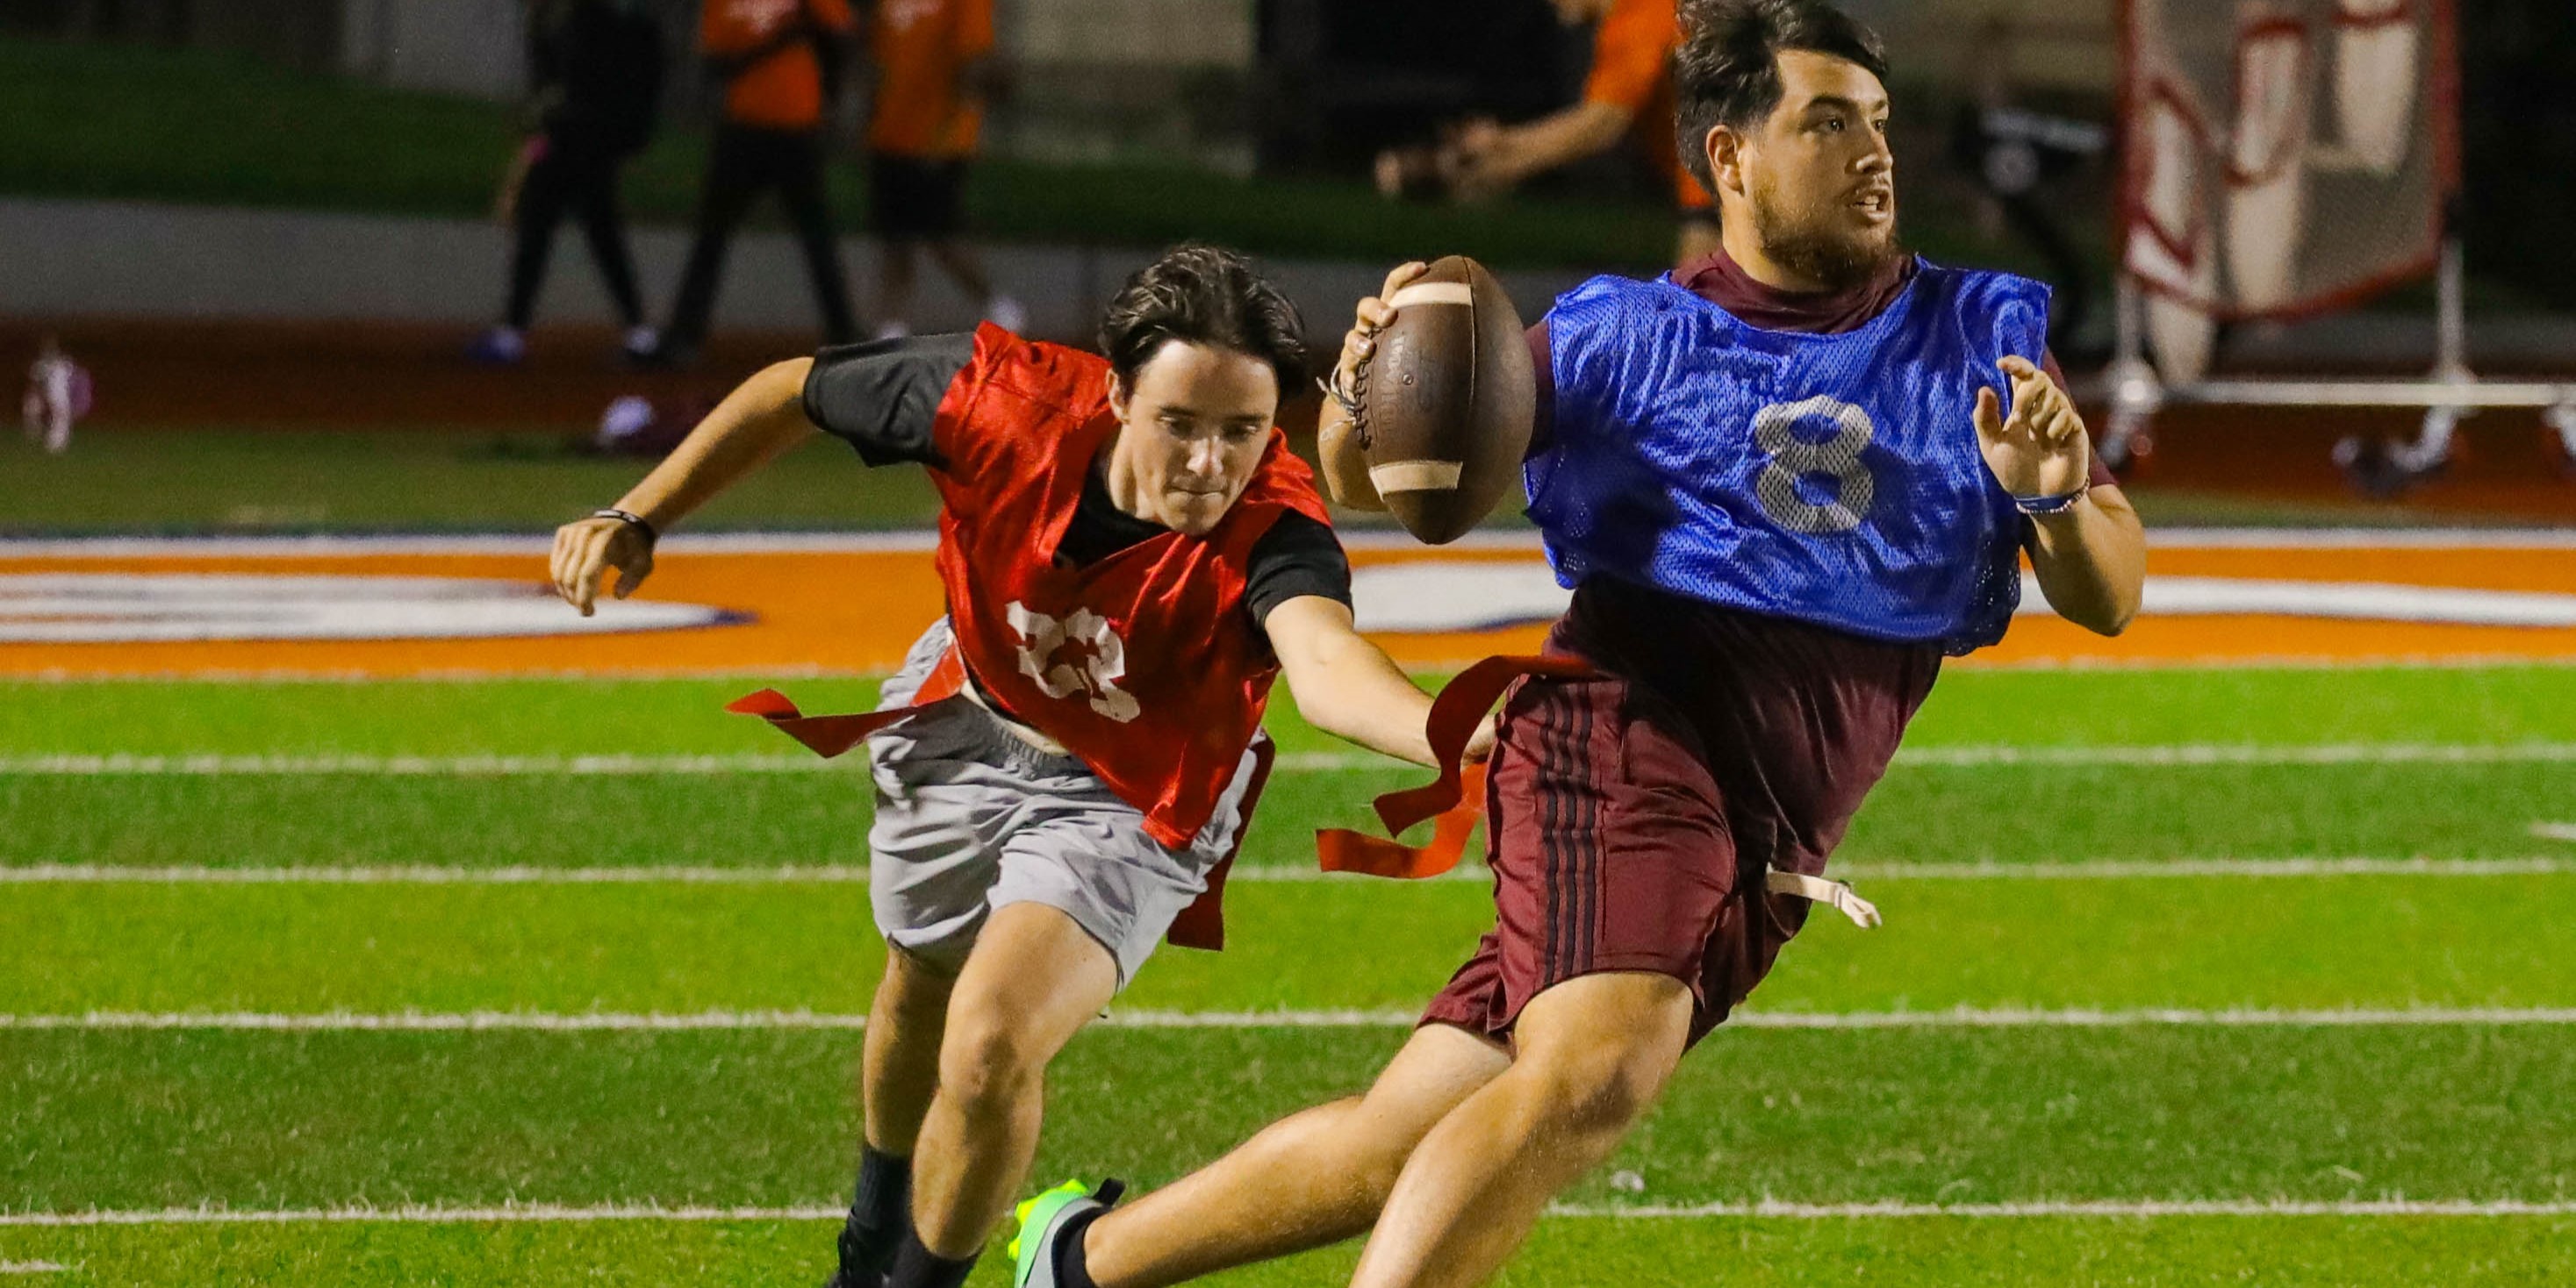 flag football players chasing one another to pull flag